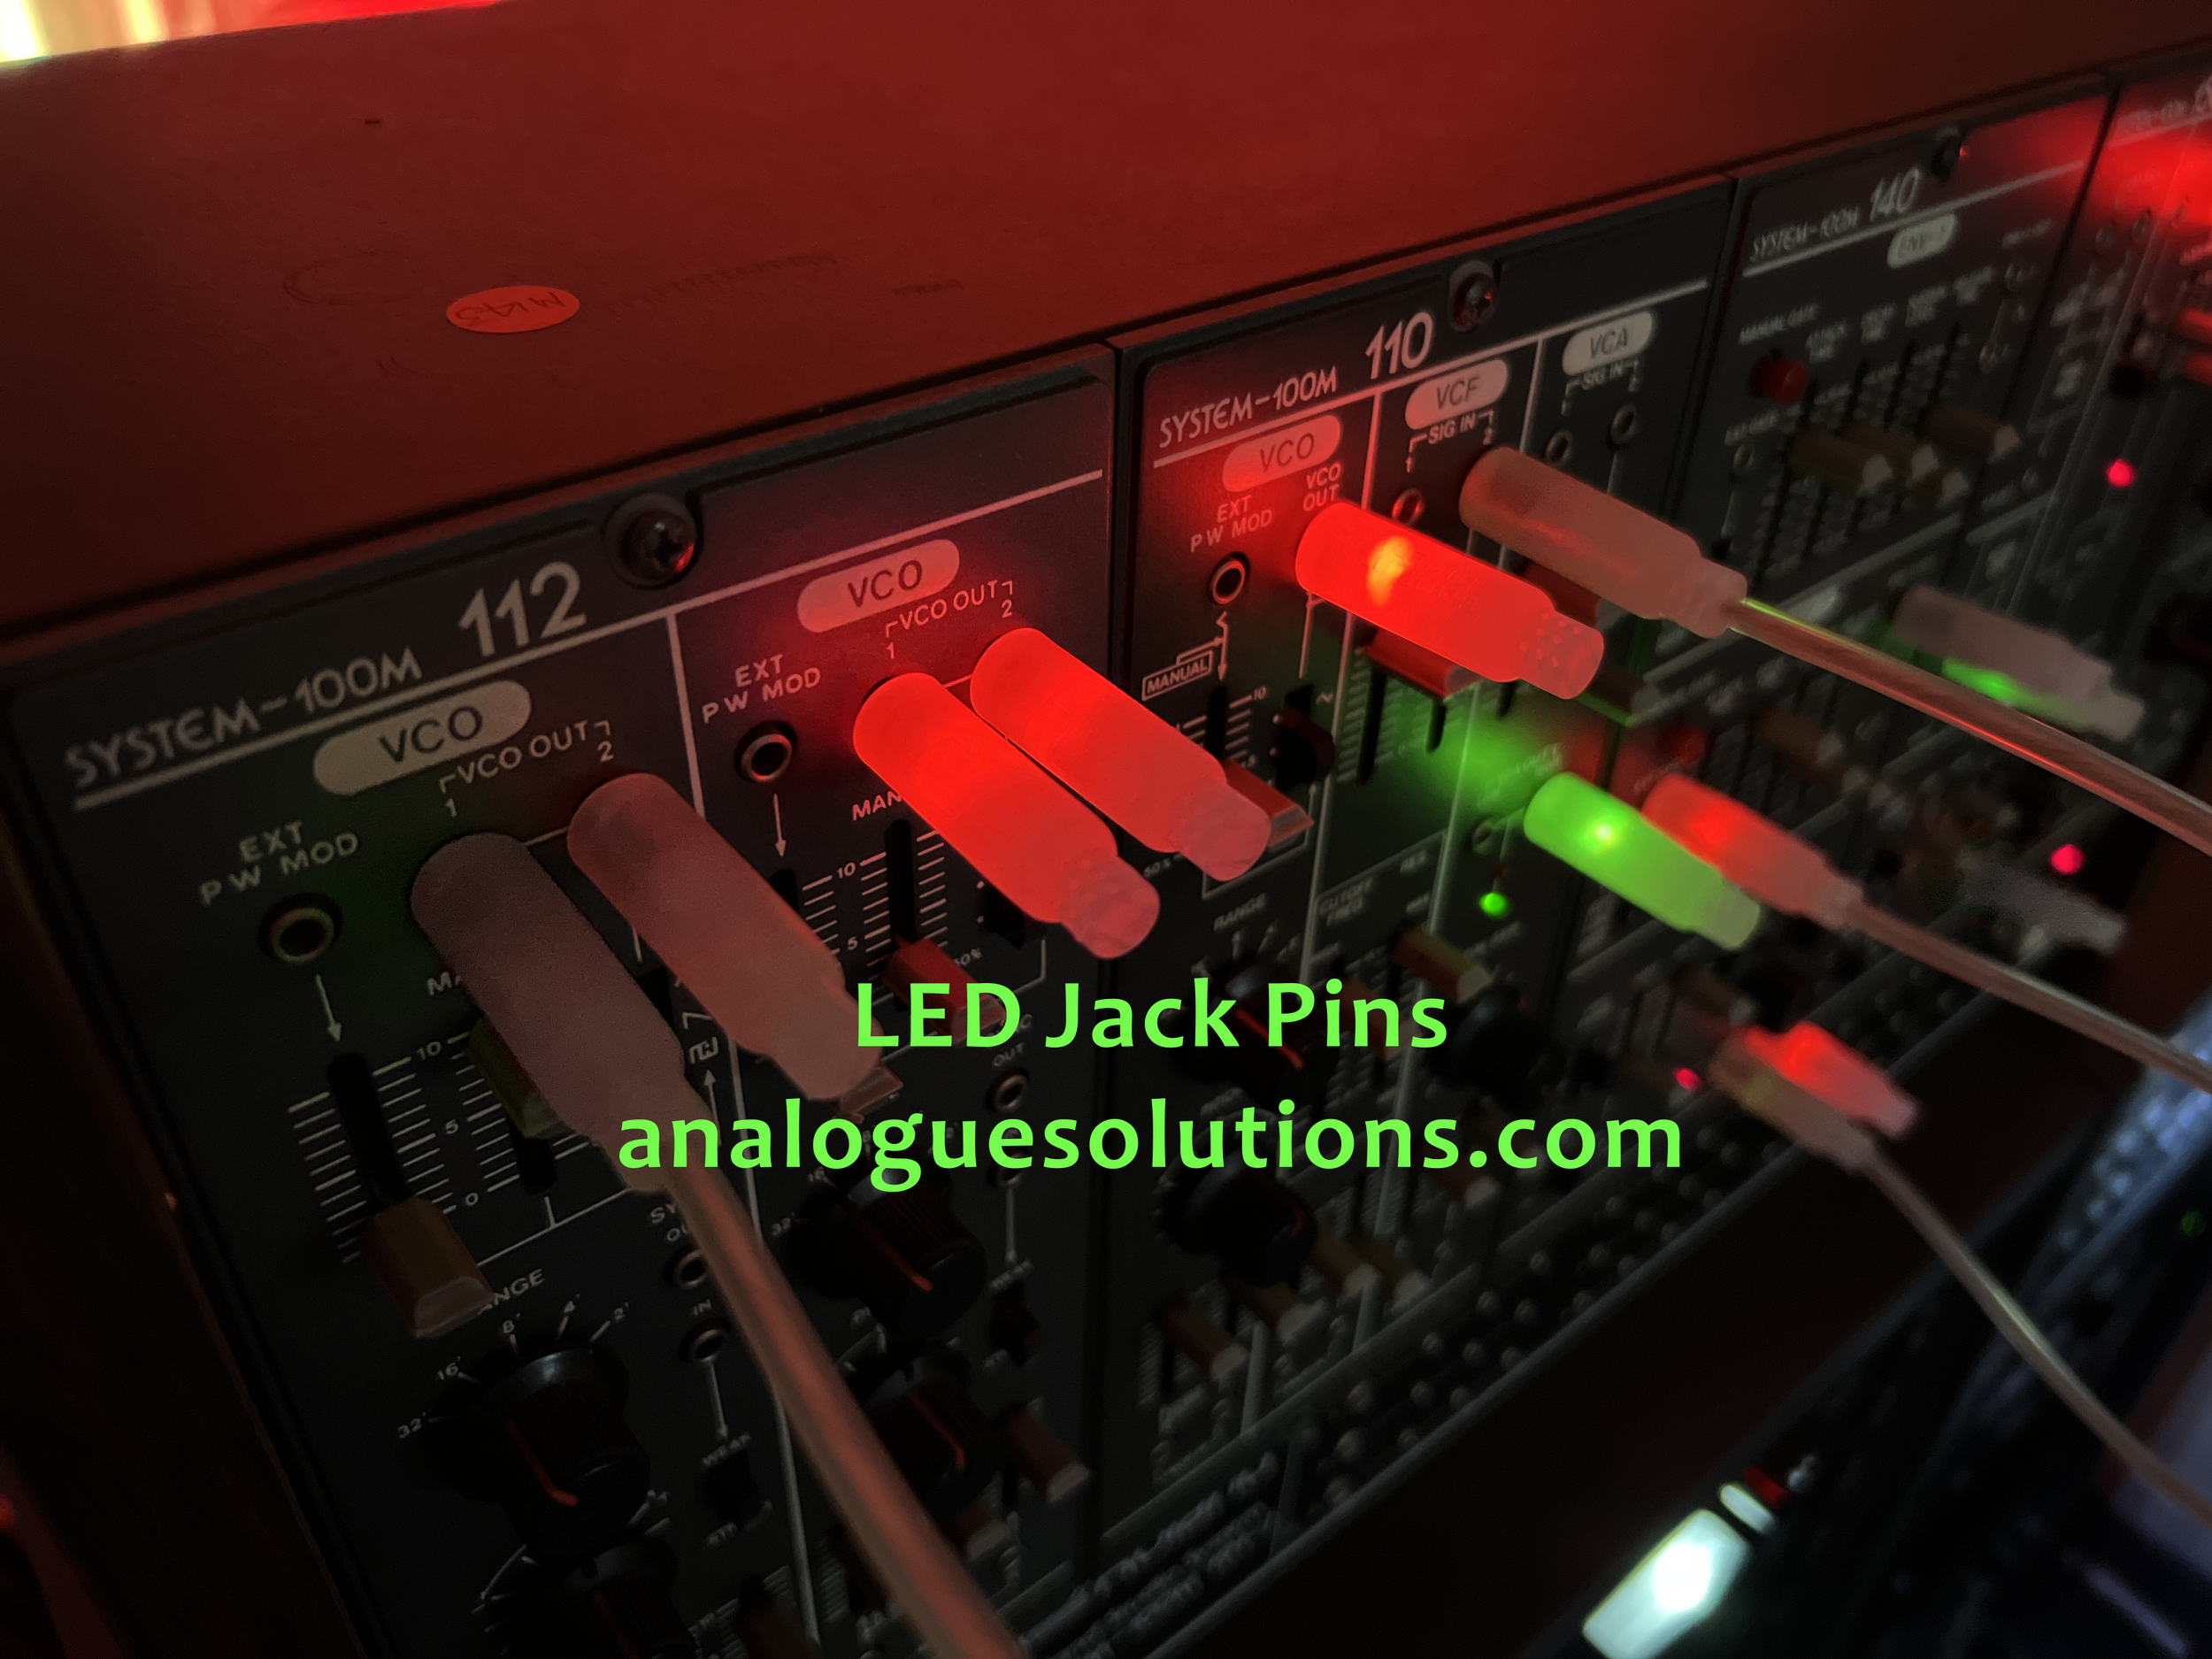 analogue solutions roland system 100m LED CV jack pins.png